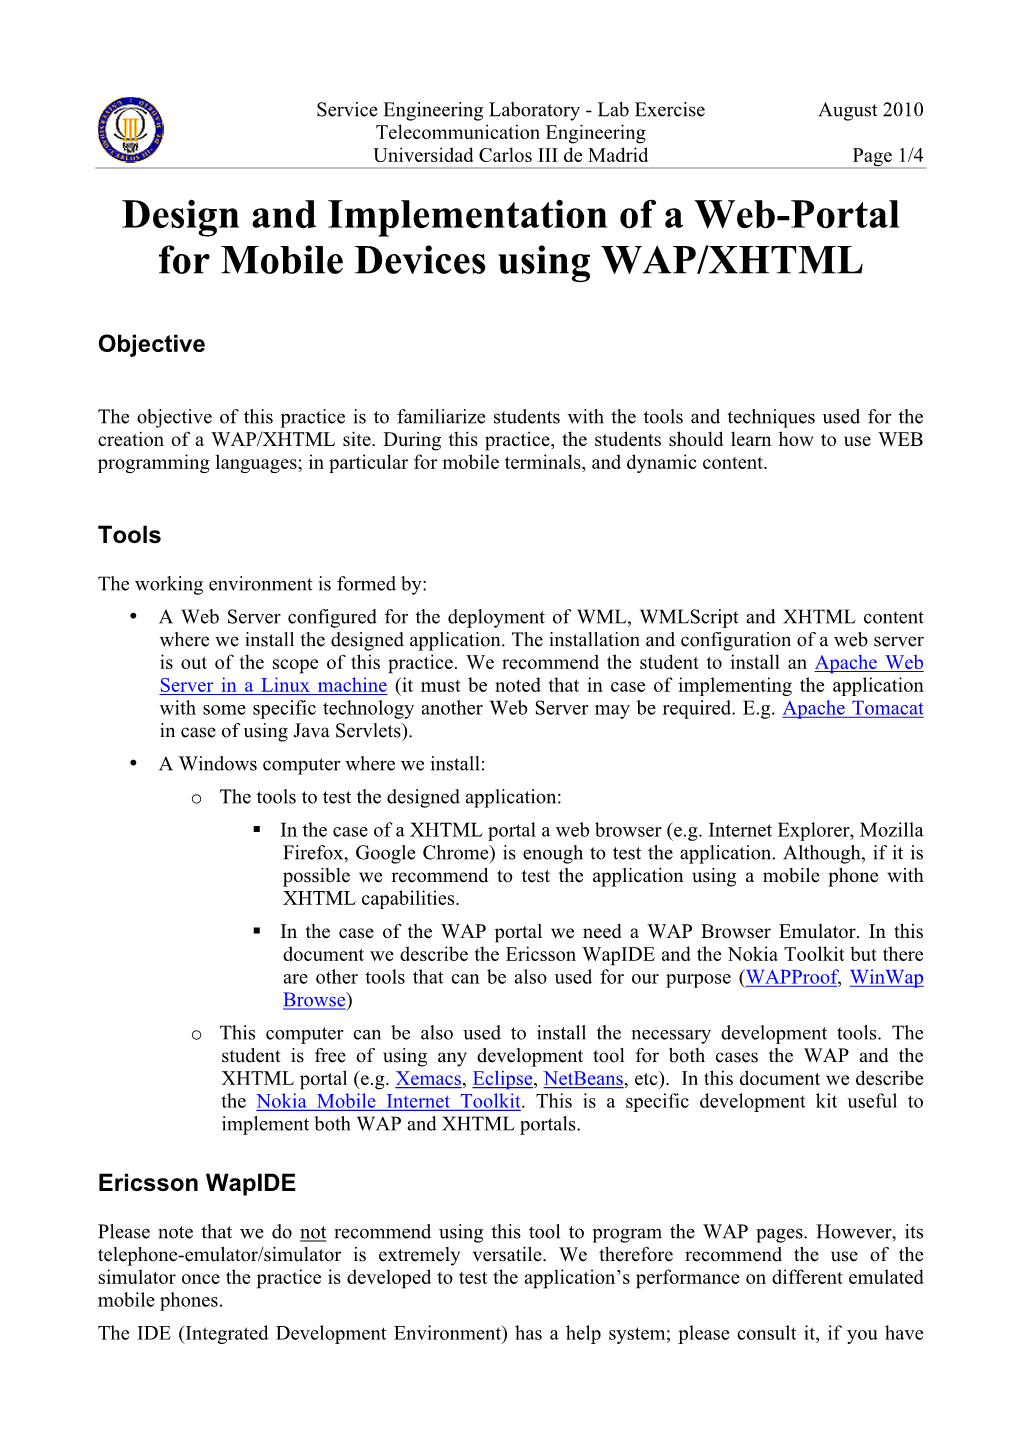 Design and Implementation of a Web-Portal for Mobile Devices Using WAP/XHTML